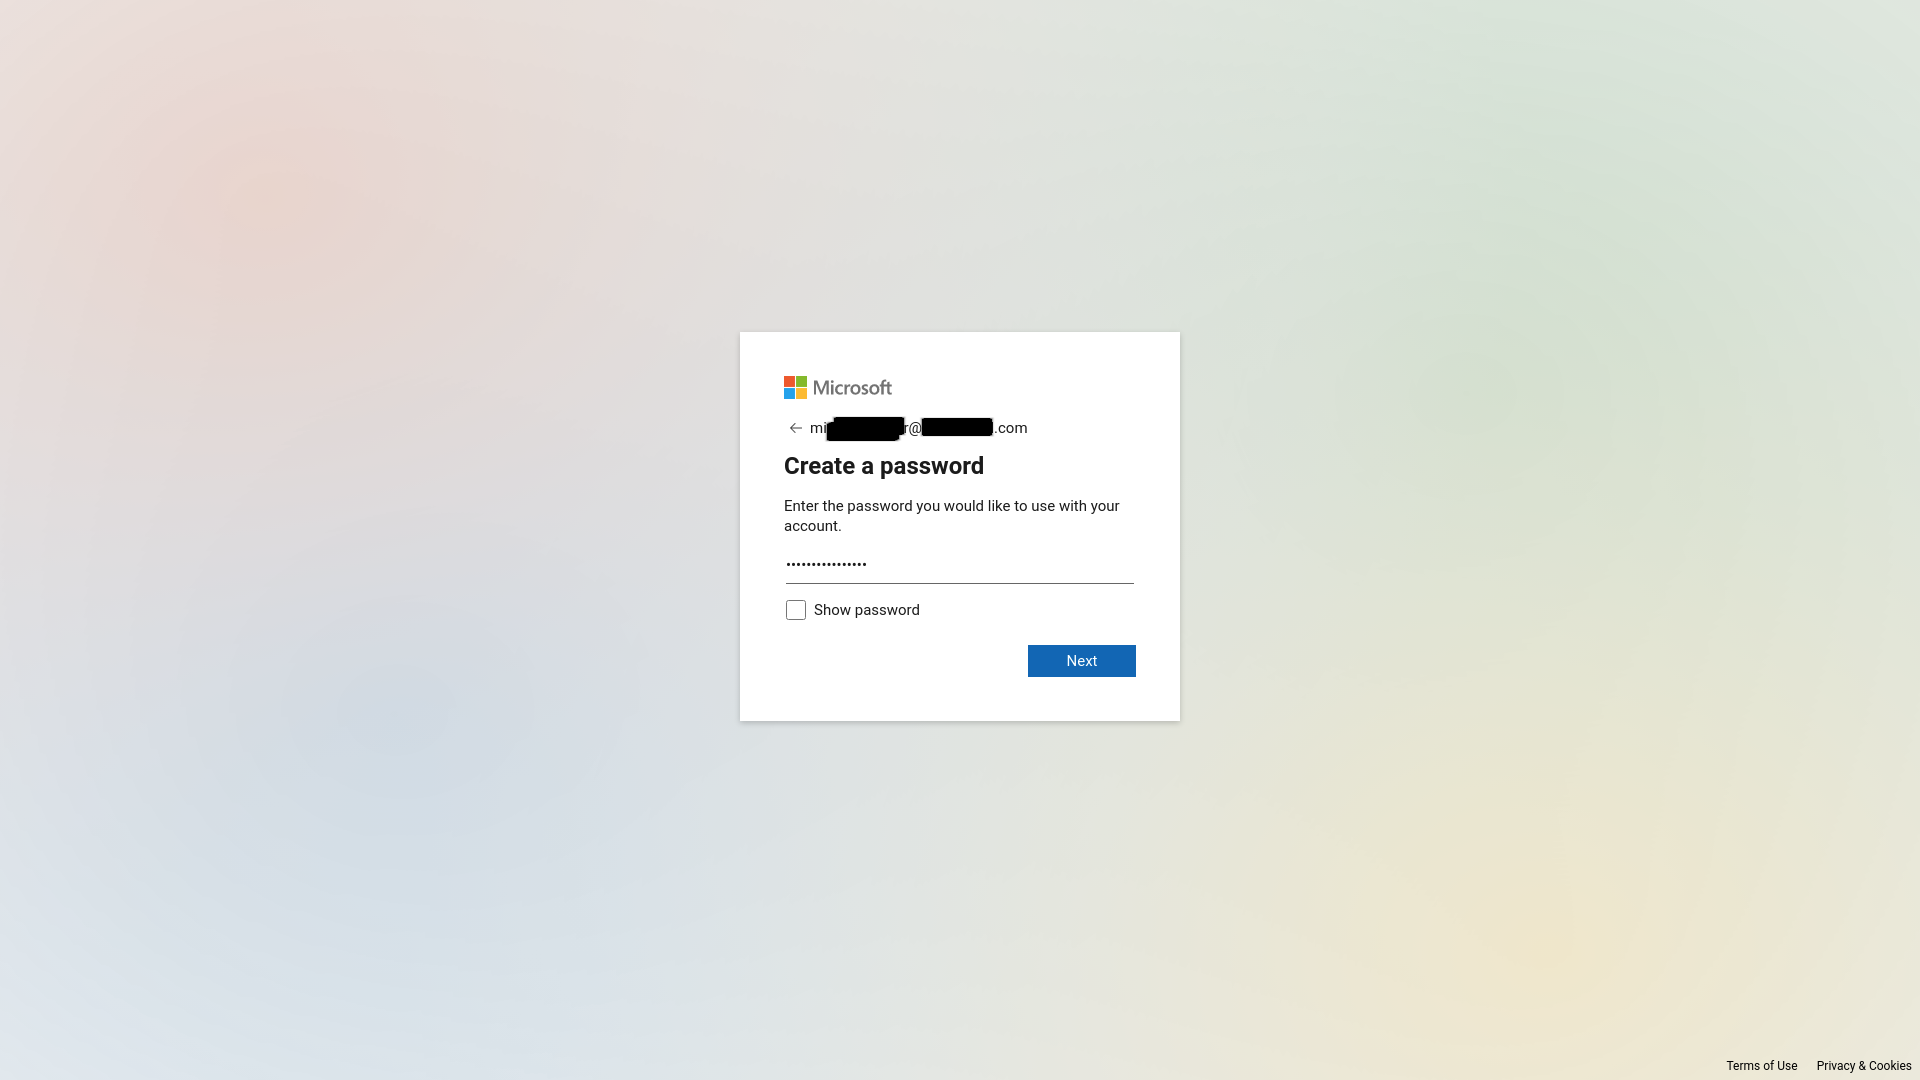 Enter a password for the new Microsoft account